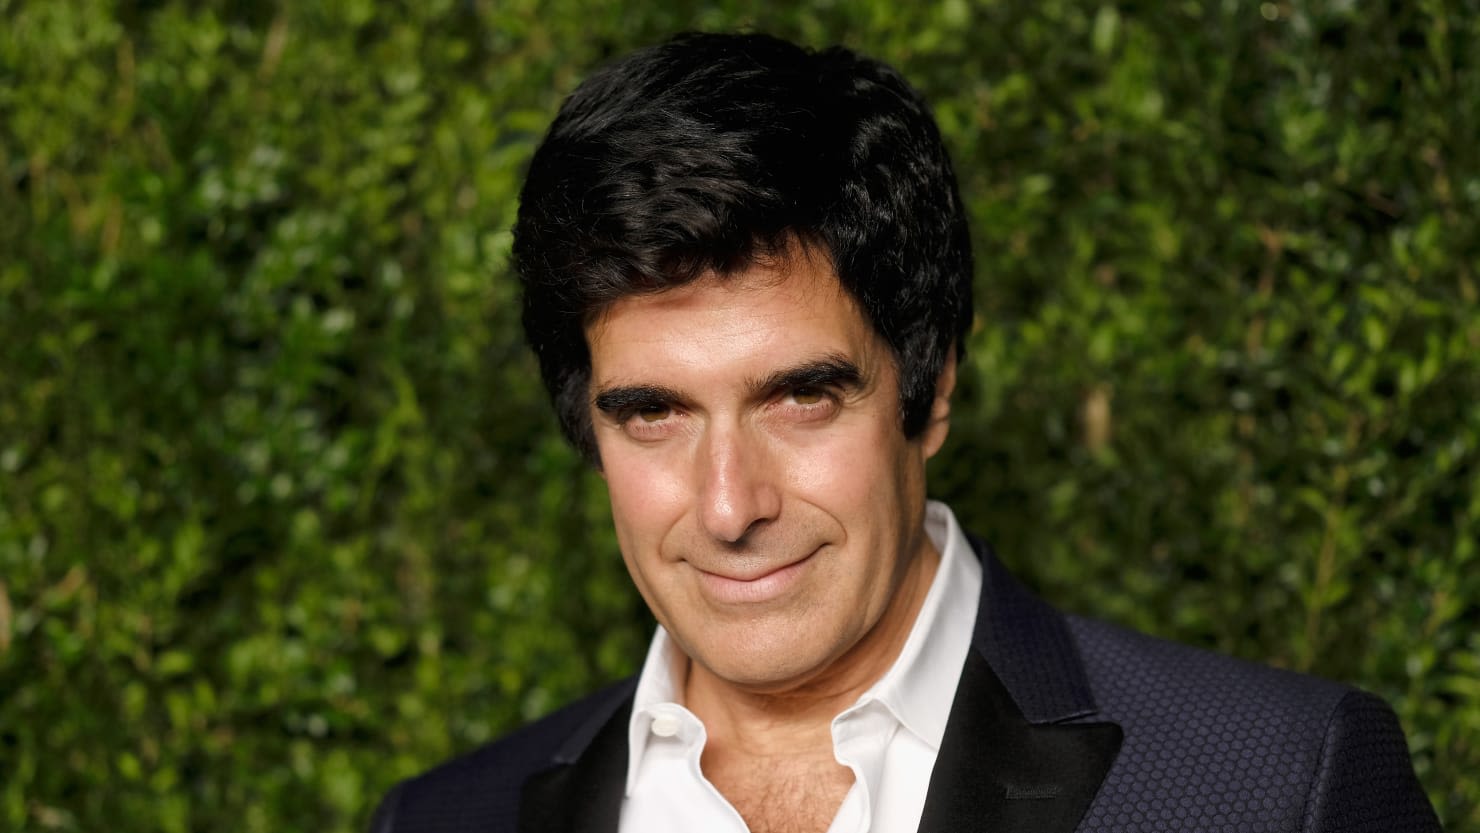 Epstein’s Victims Wanted Info on David Copperfield